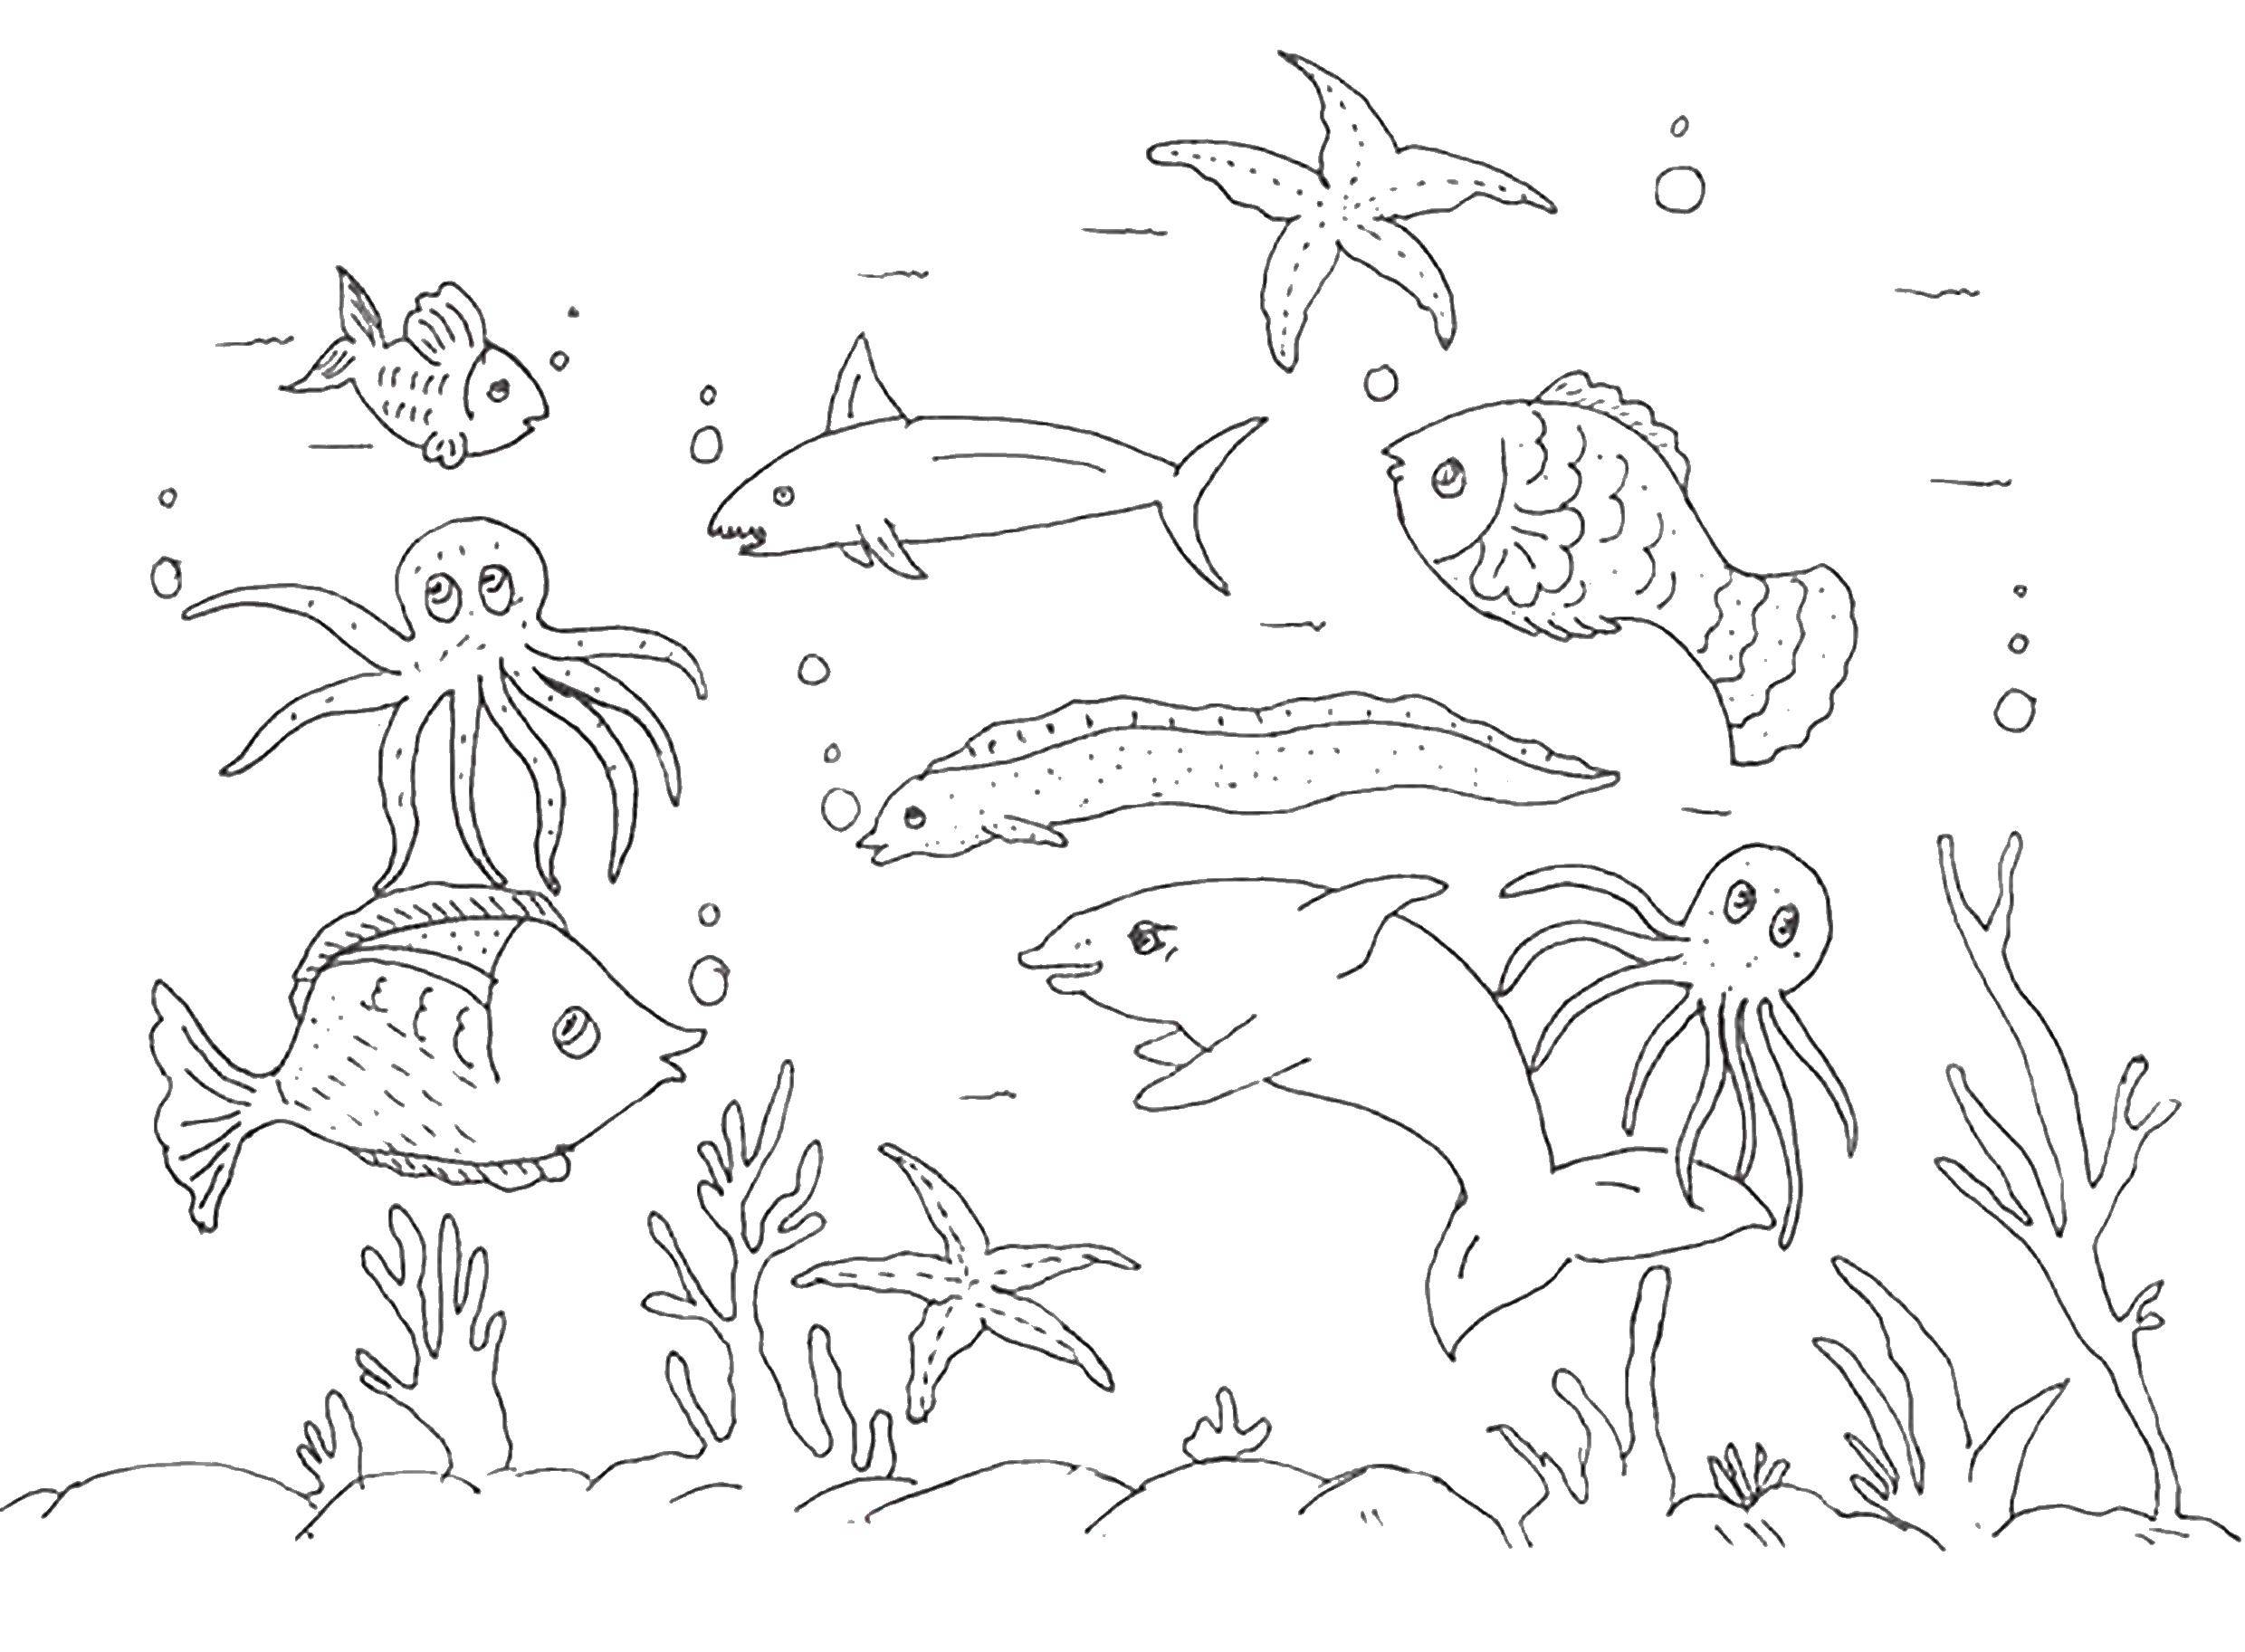 Coloring The ocean with the fishes. Category fish. Tags:  fish.